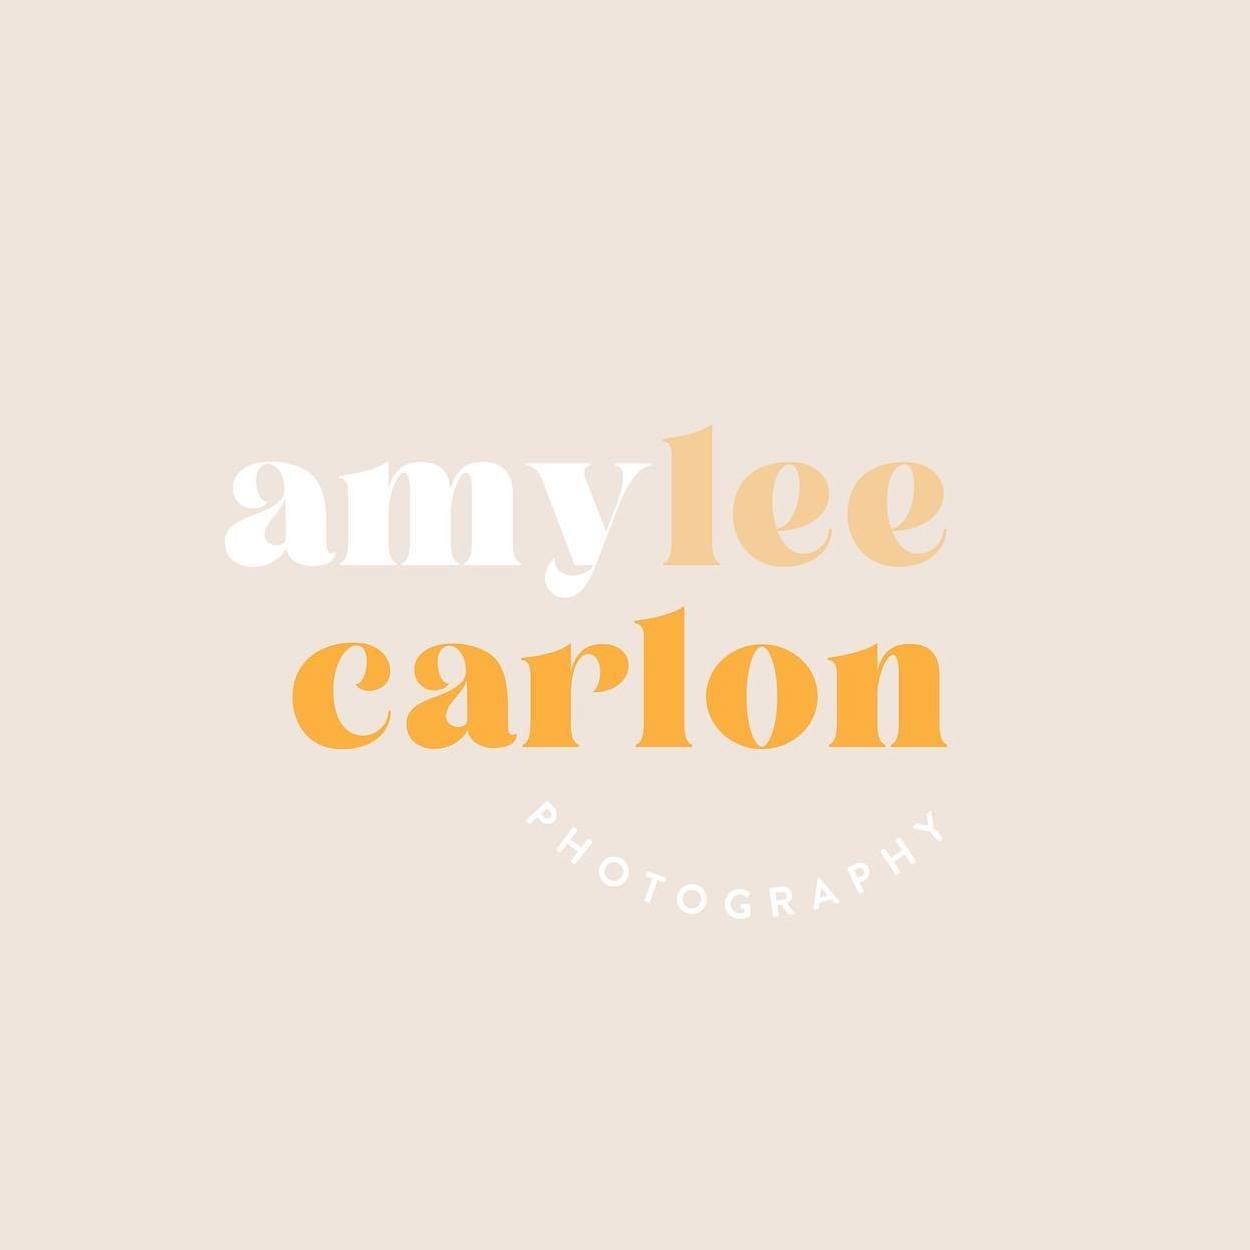 Amy Lee Carlon Photography business logo, white and orange font on a cream background.